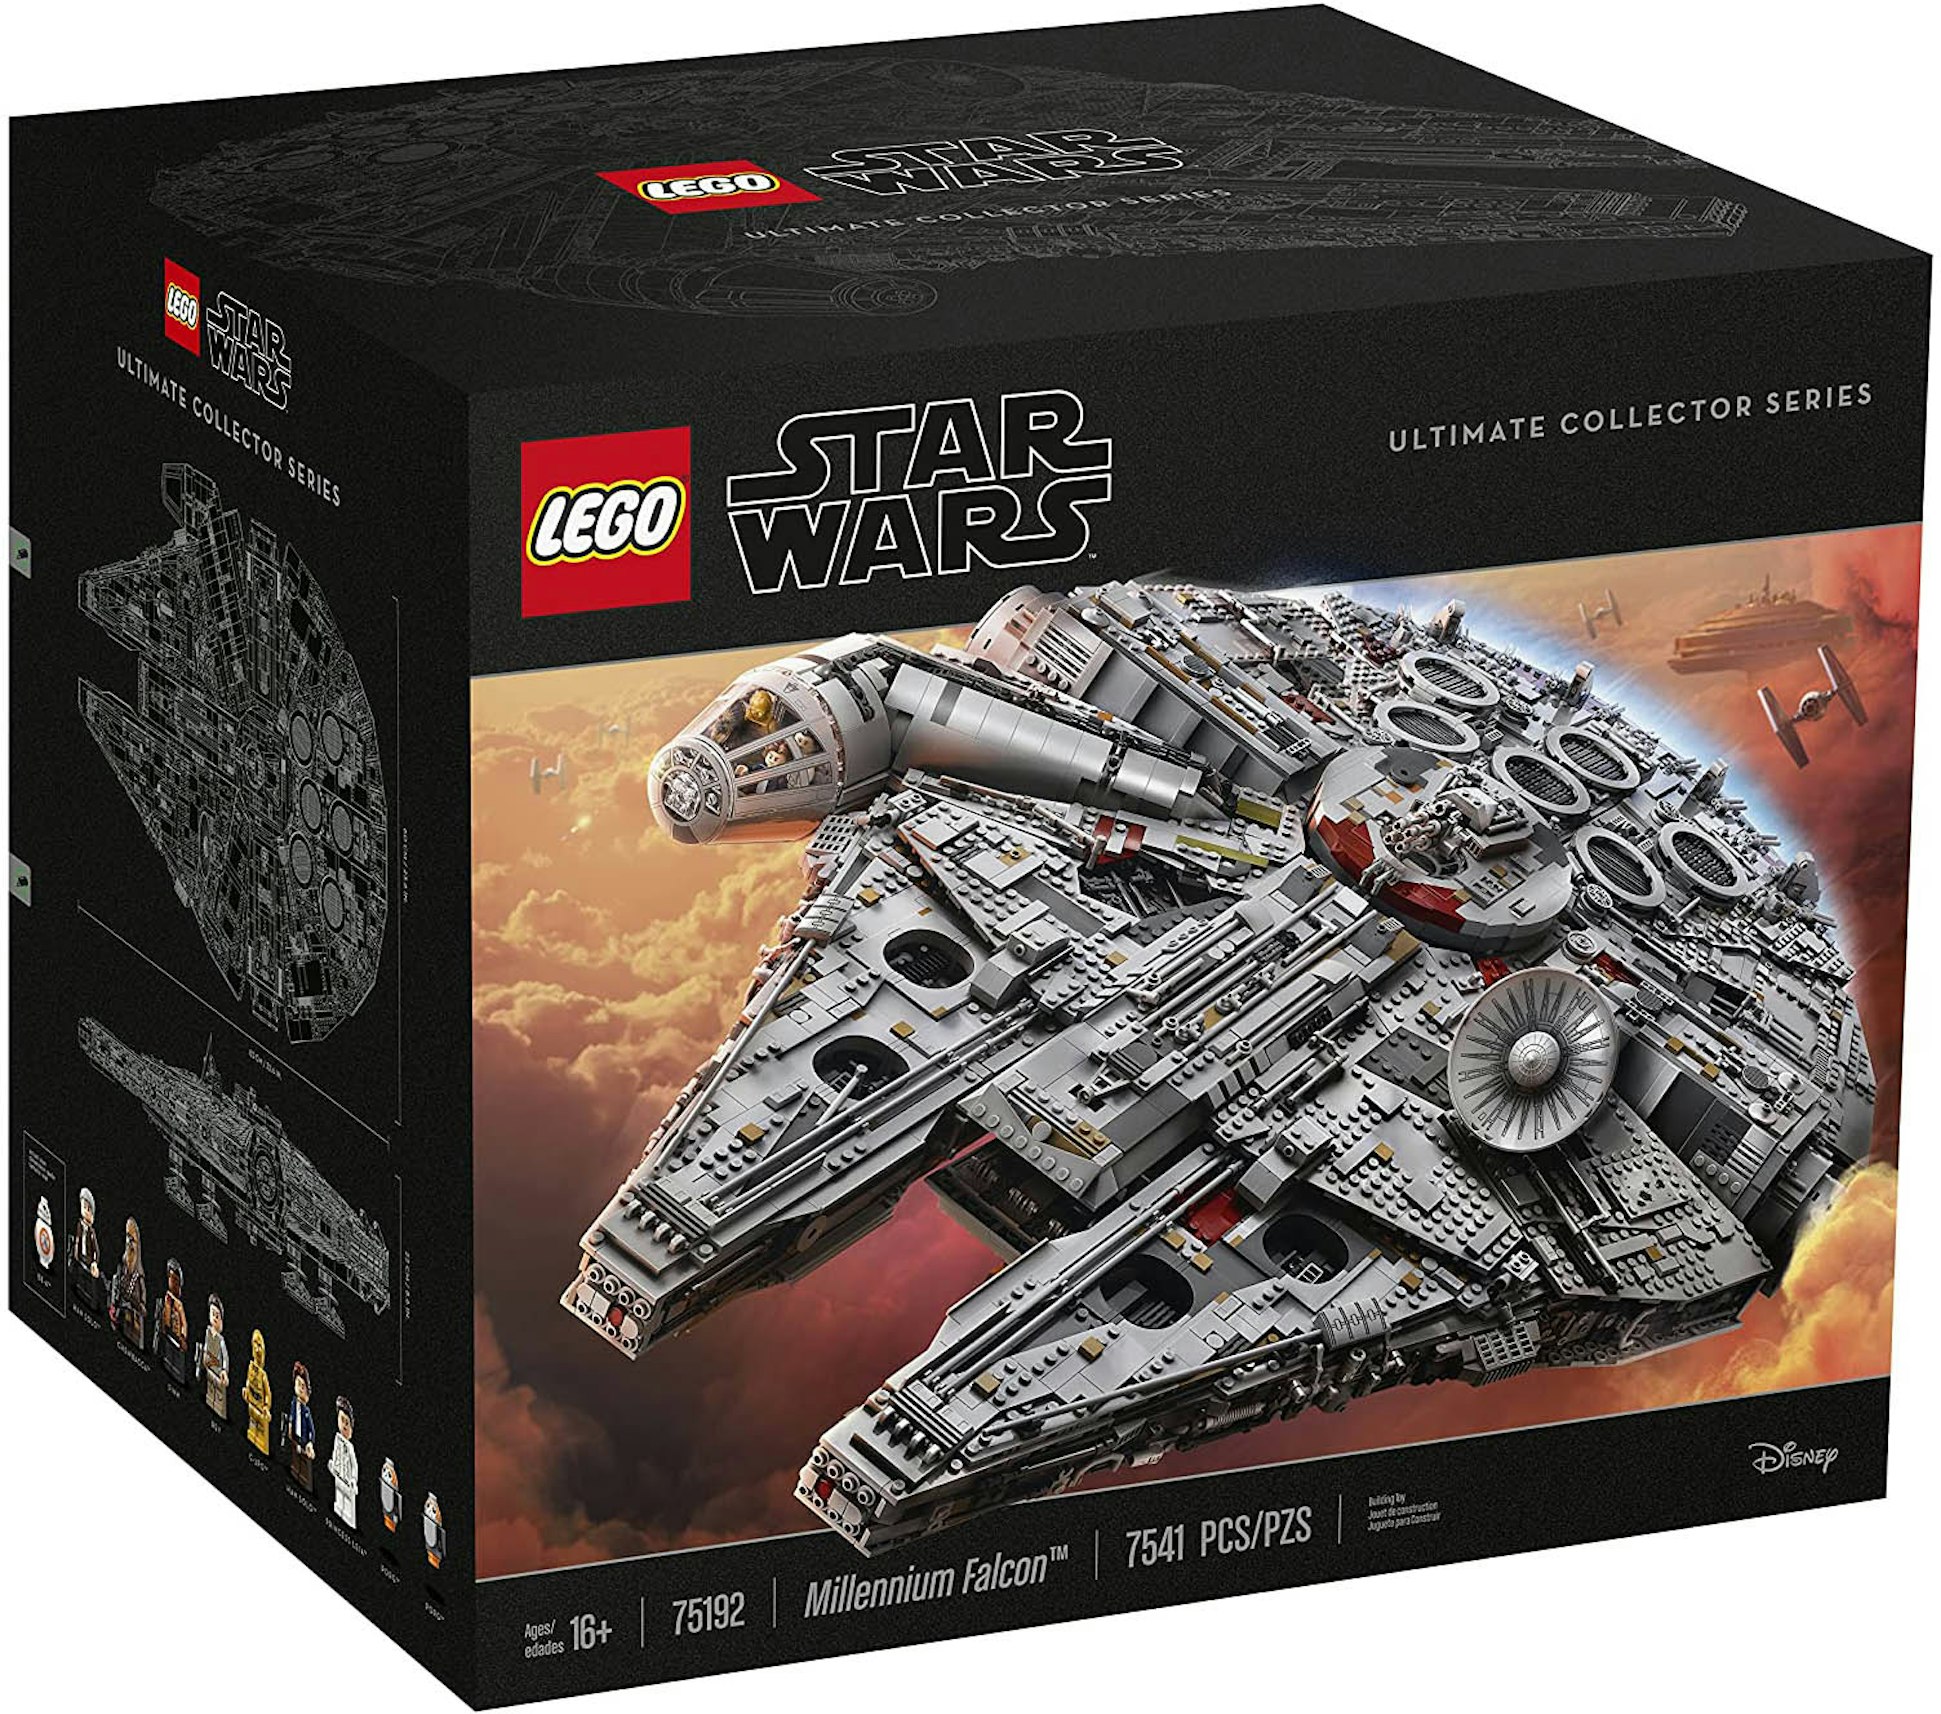 Star Wars Millennium Falcon Ultimate Collector Series Set - US